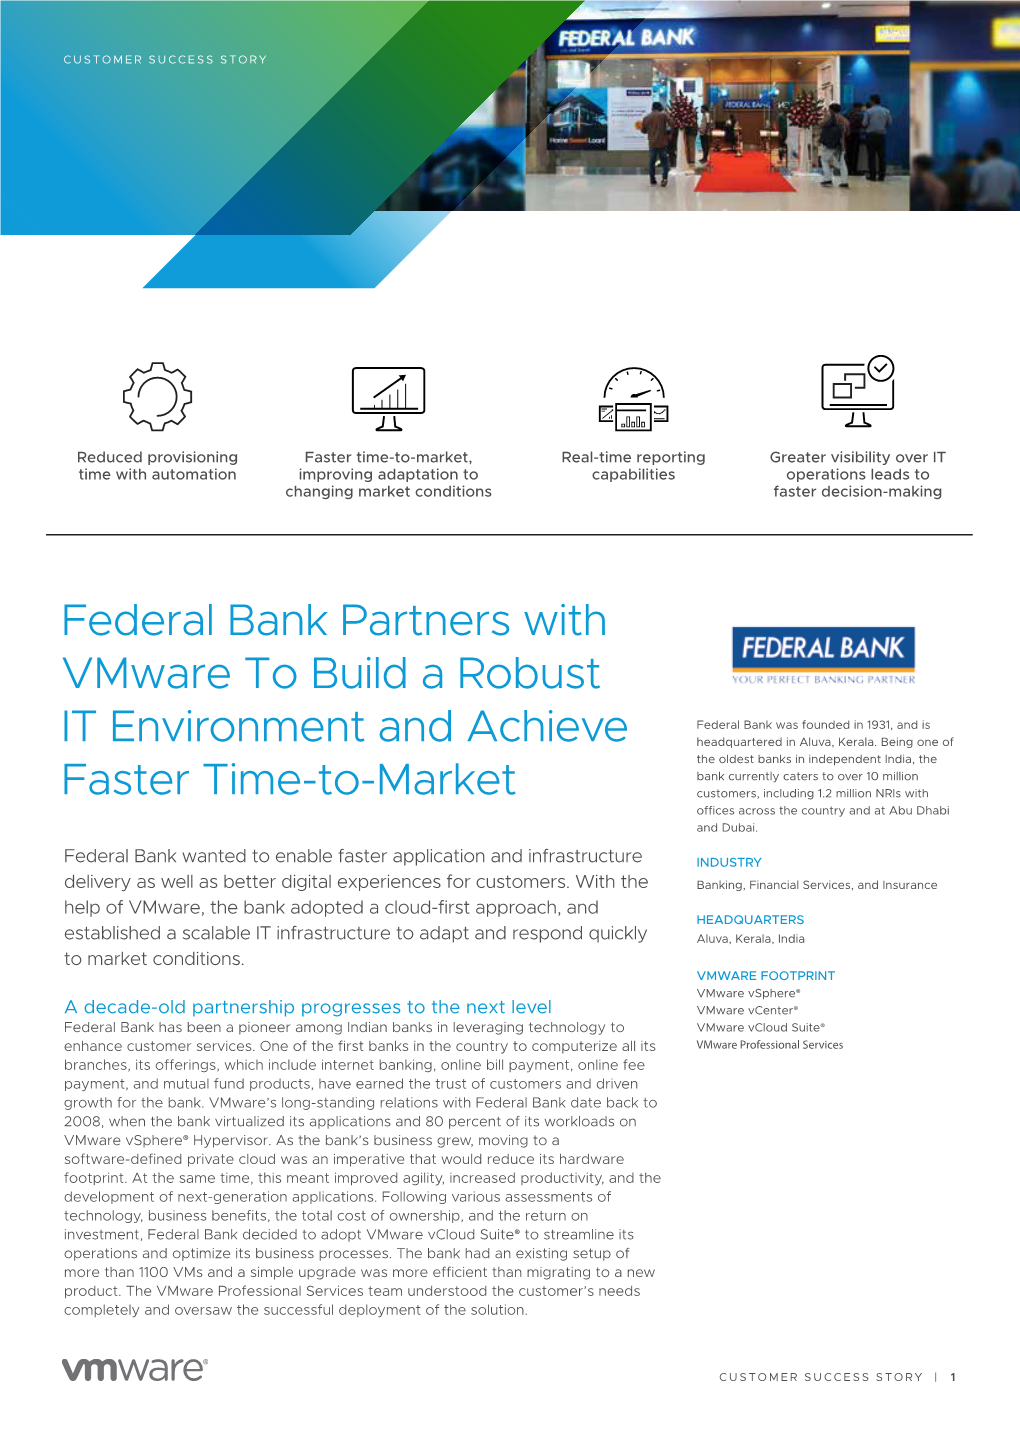 Federal Bank Partners with Vmware to Build a Robust IT Environment